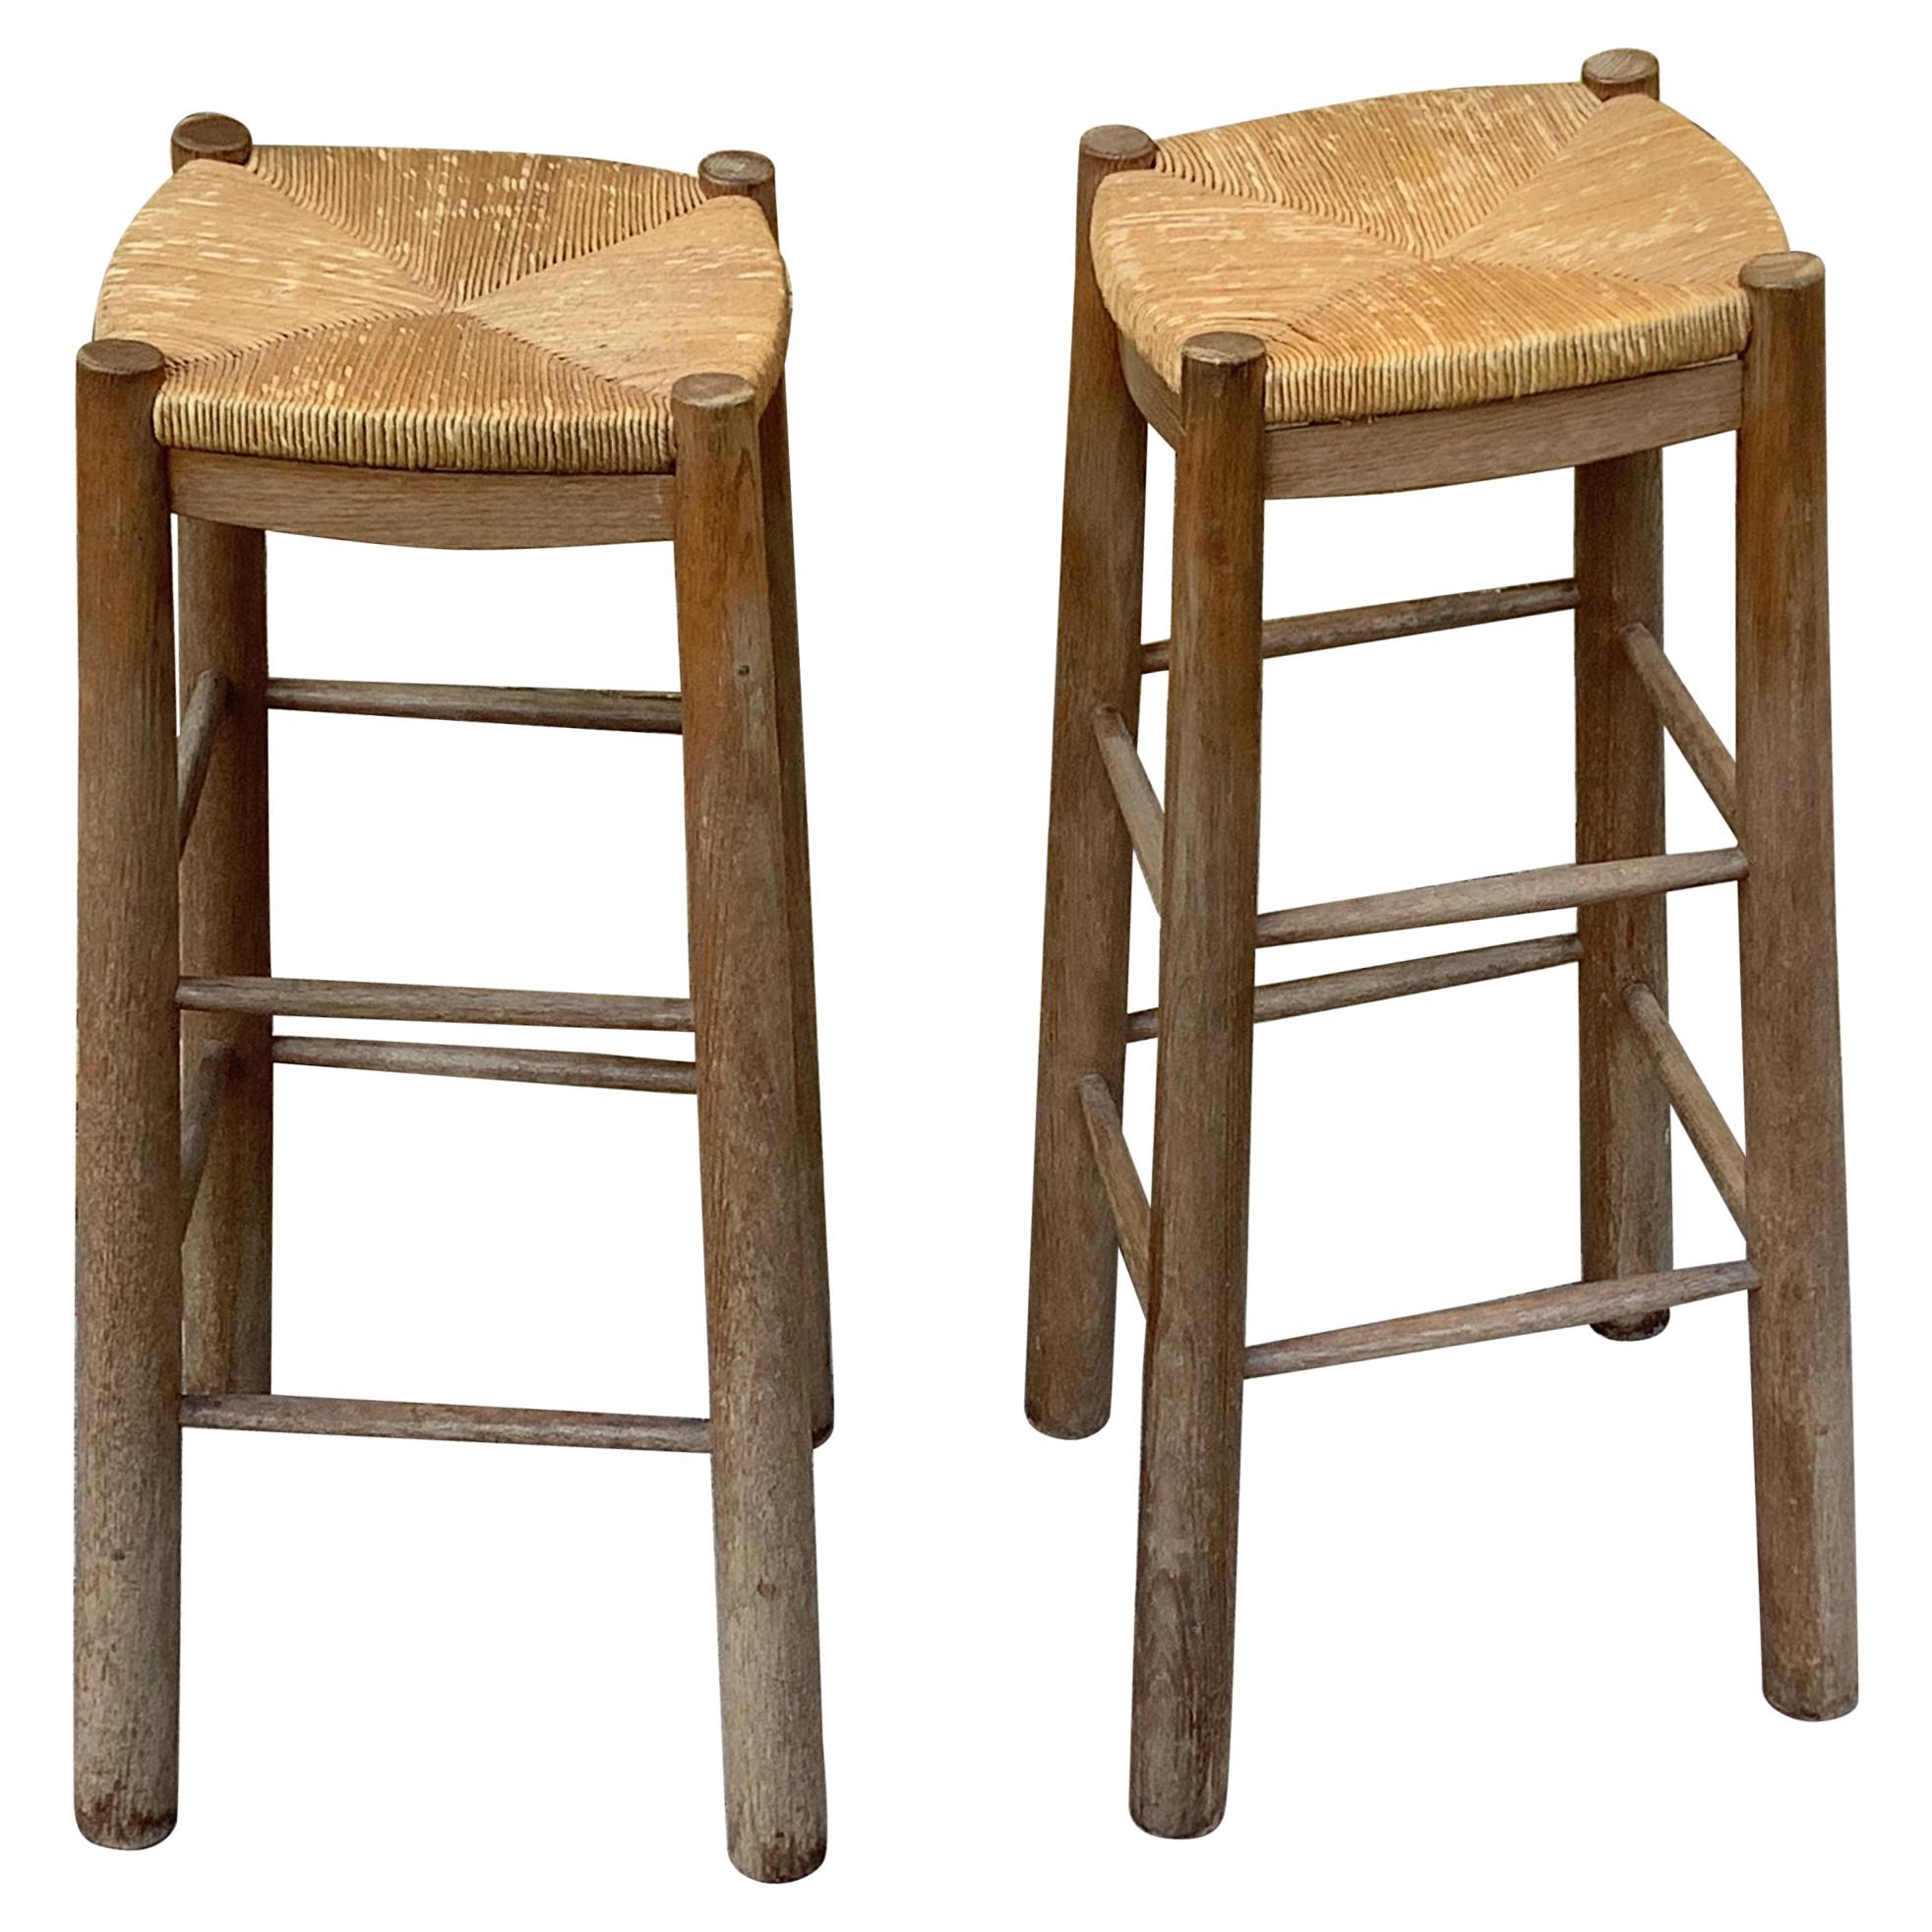 1960 S Woven French Breakfast Stools, Woven Rush Seat Bar Stools